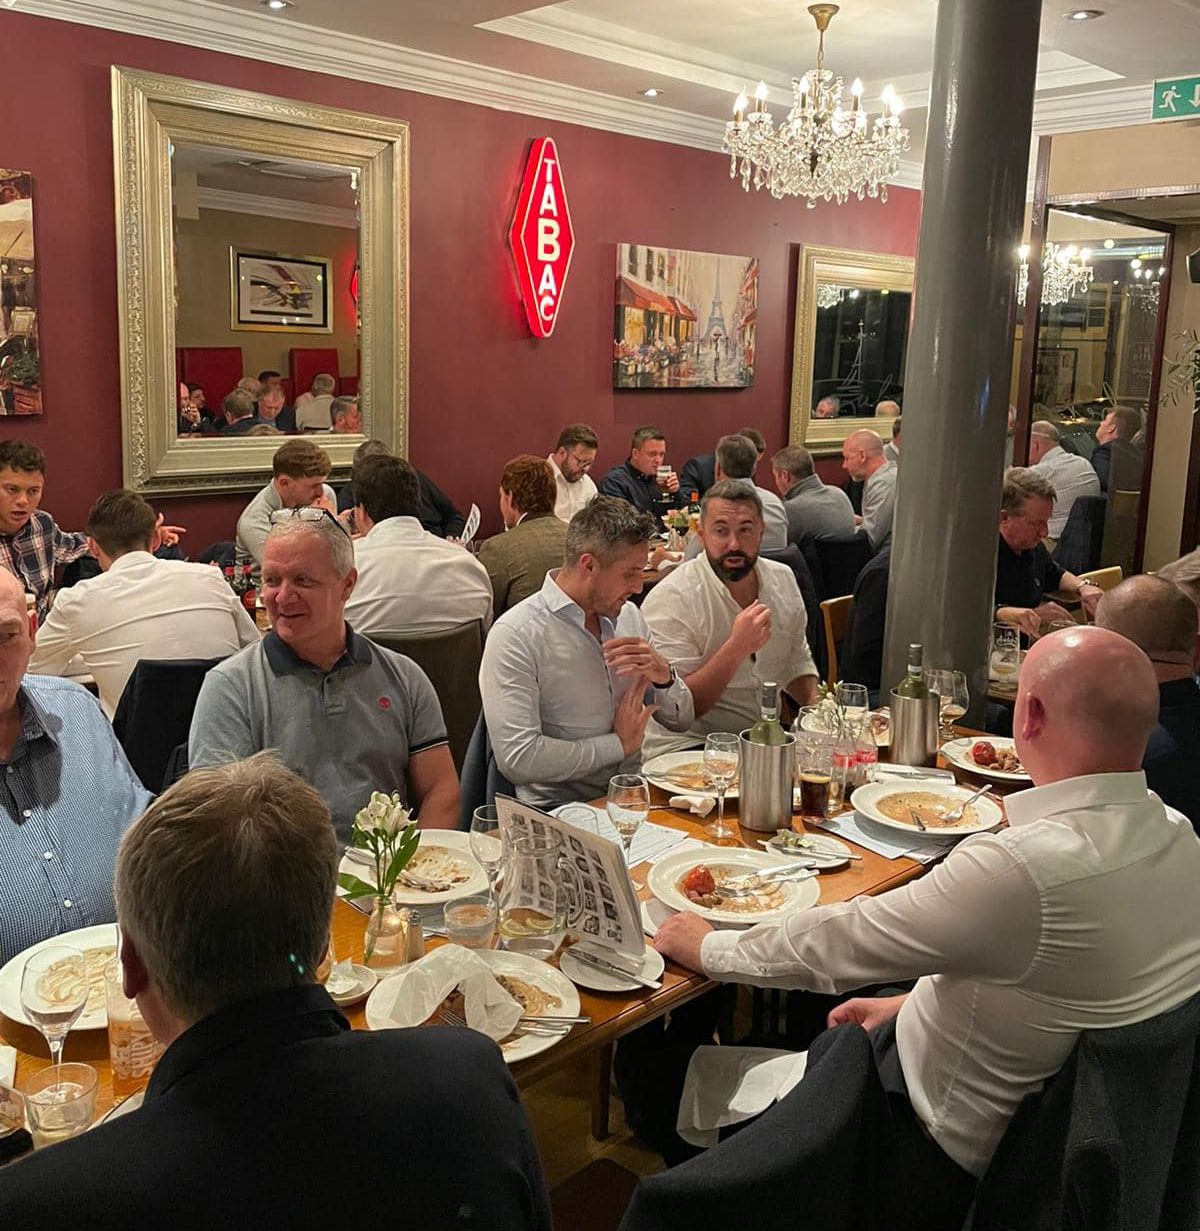 Neil Gokcen hosted a fundraising Sportsmans Dinner at Auberge restaurant in Southport to raise money for The Larks / Marina Dalglish Appeal in memory of his wife Catherine